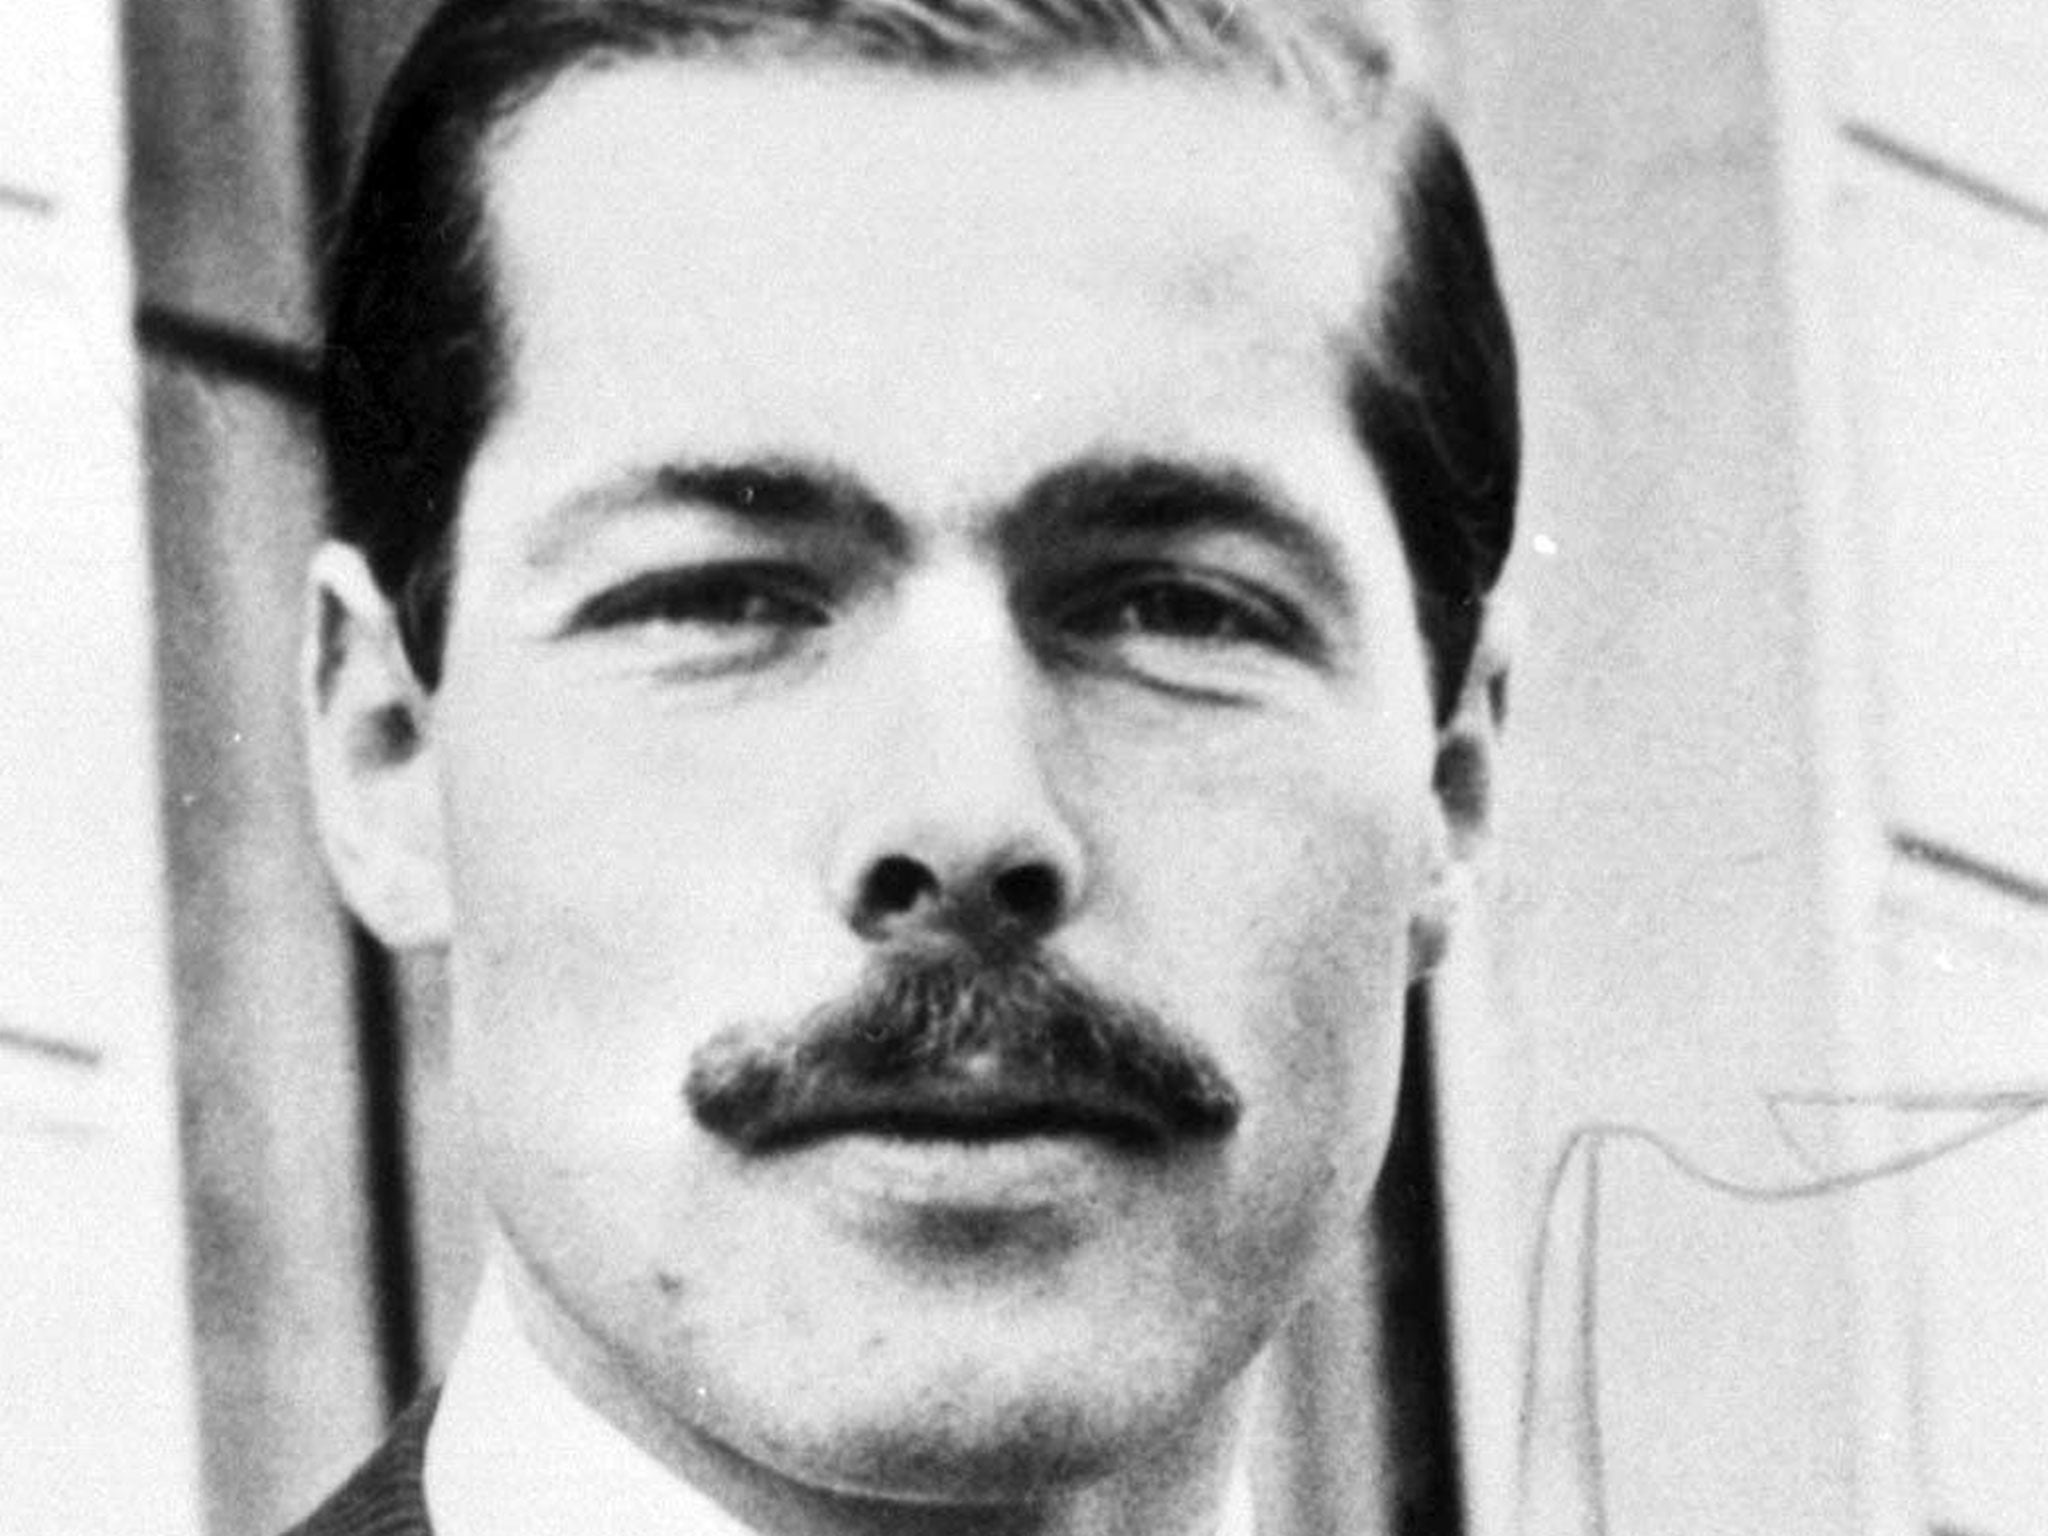 Lord Lucan disappeared in 1974 after the murder of his children’s nanny